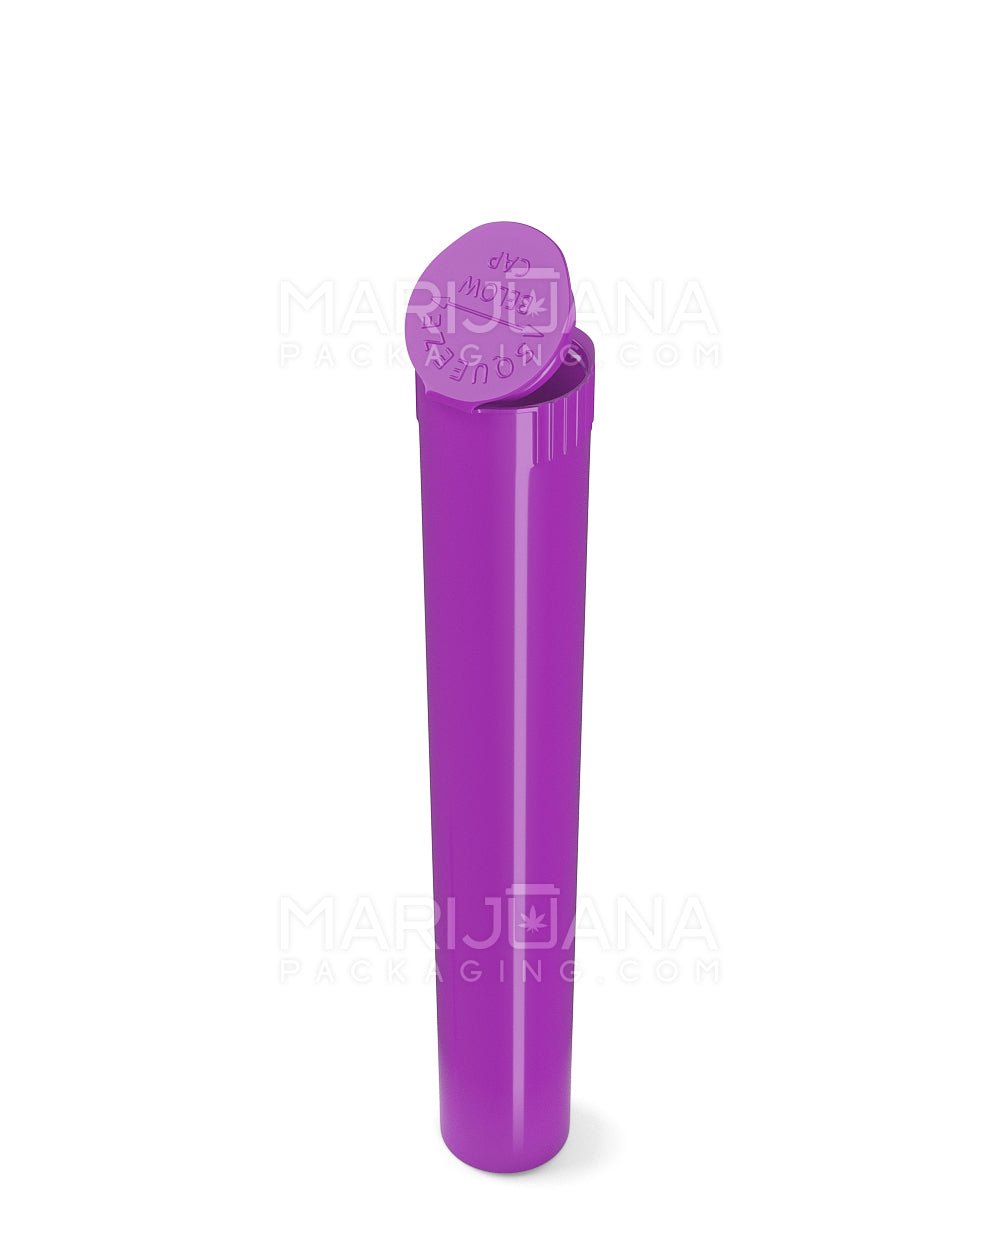 Child Resistant | King Size Pop Top Opaque Plastic Pre-Roll Tubes | 116mm - Purple - 1000 Count - 7